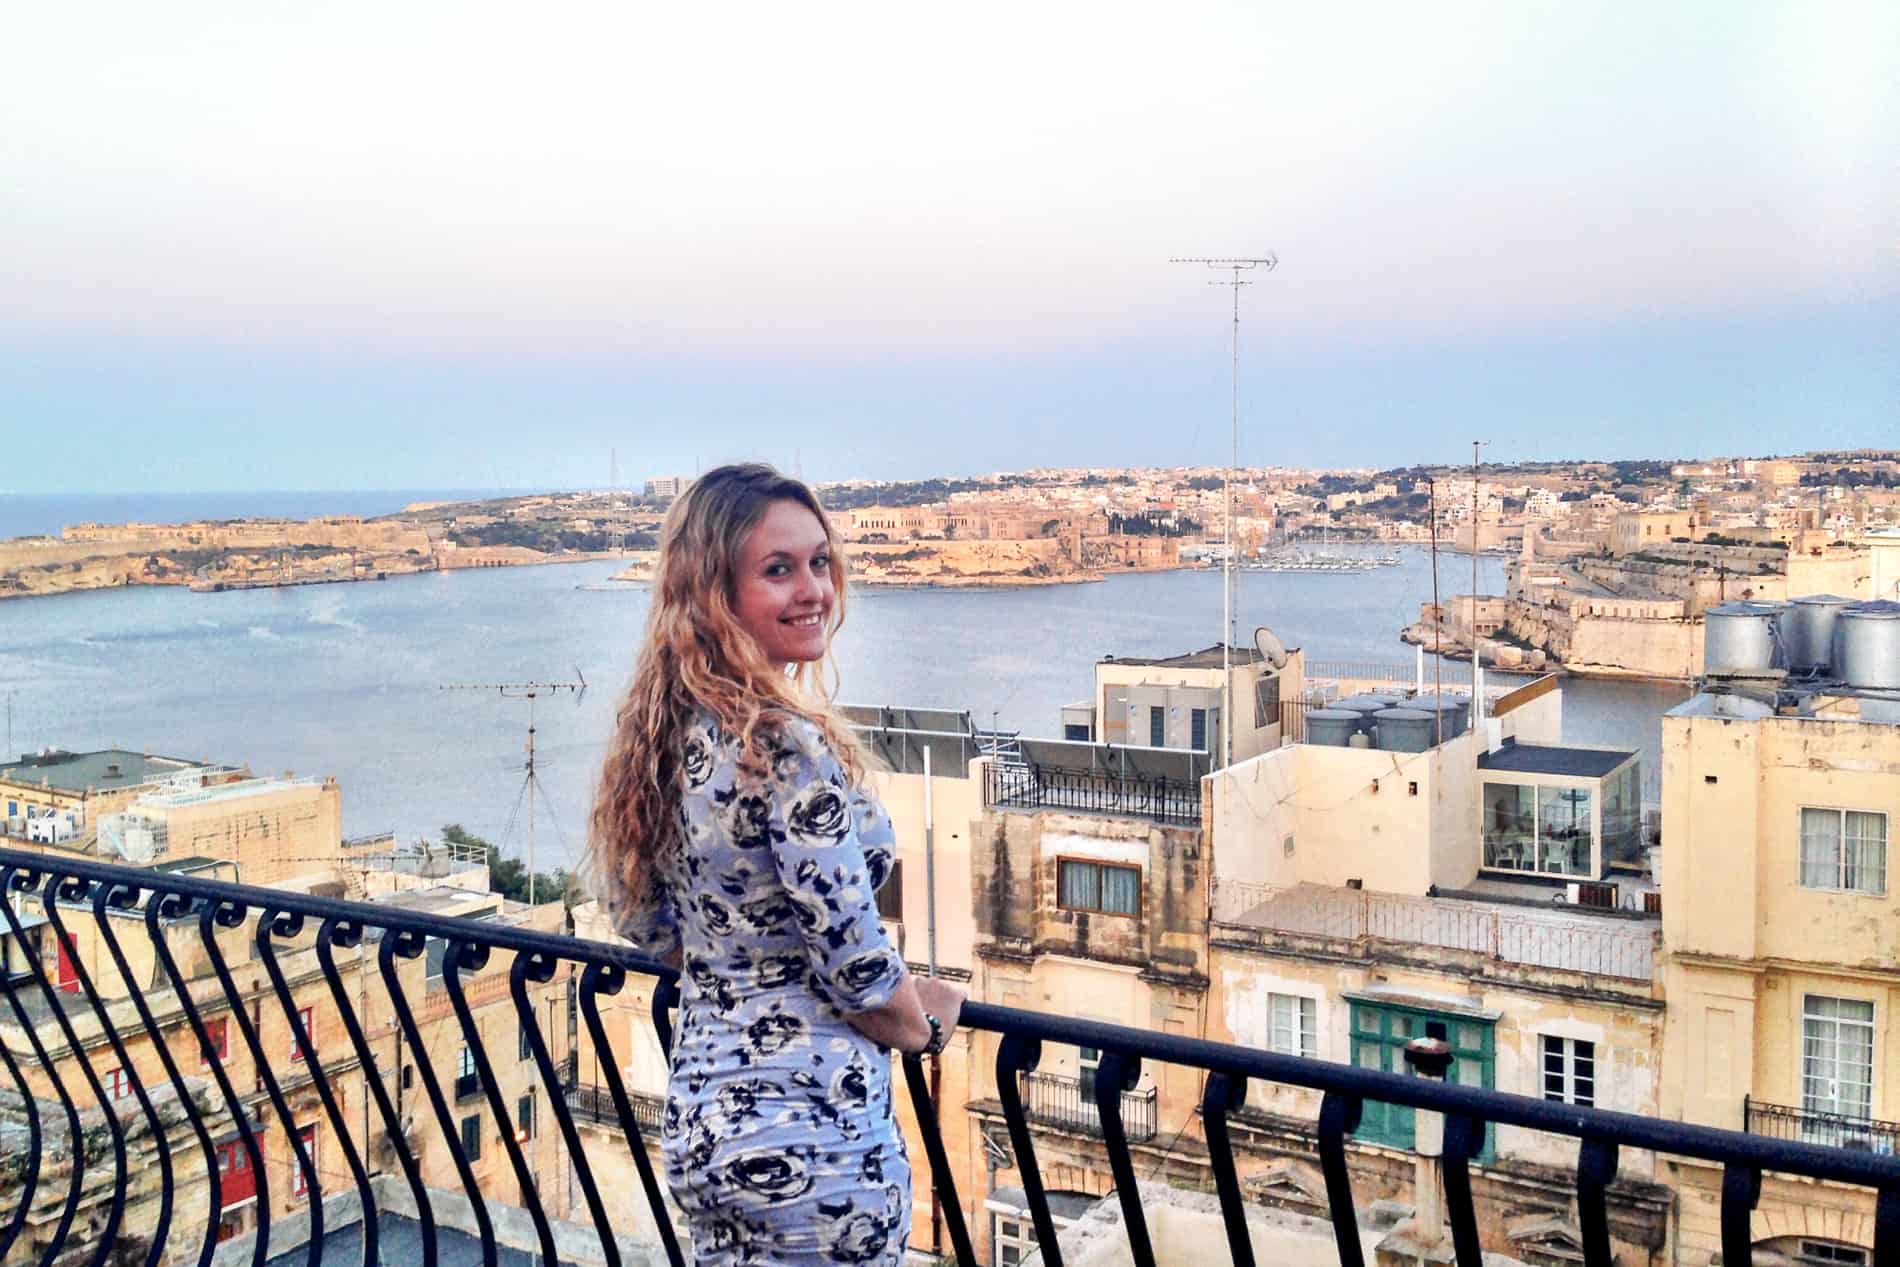 A woman smiles at the camera, standing at a Maltese Palazzo balcony overlooking a bay lined with yellow limestone buildings. 